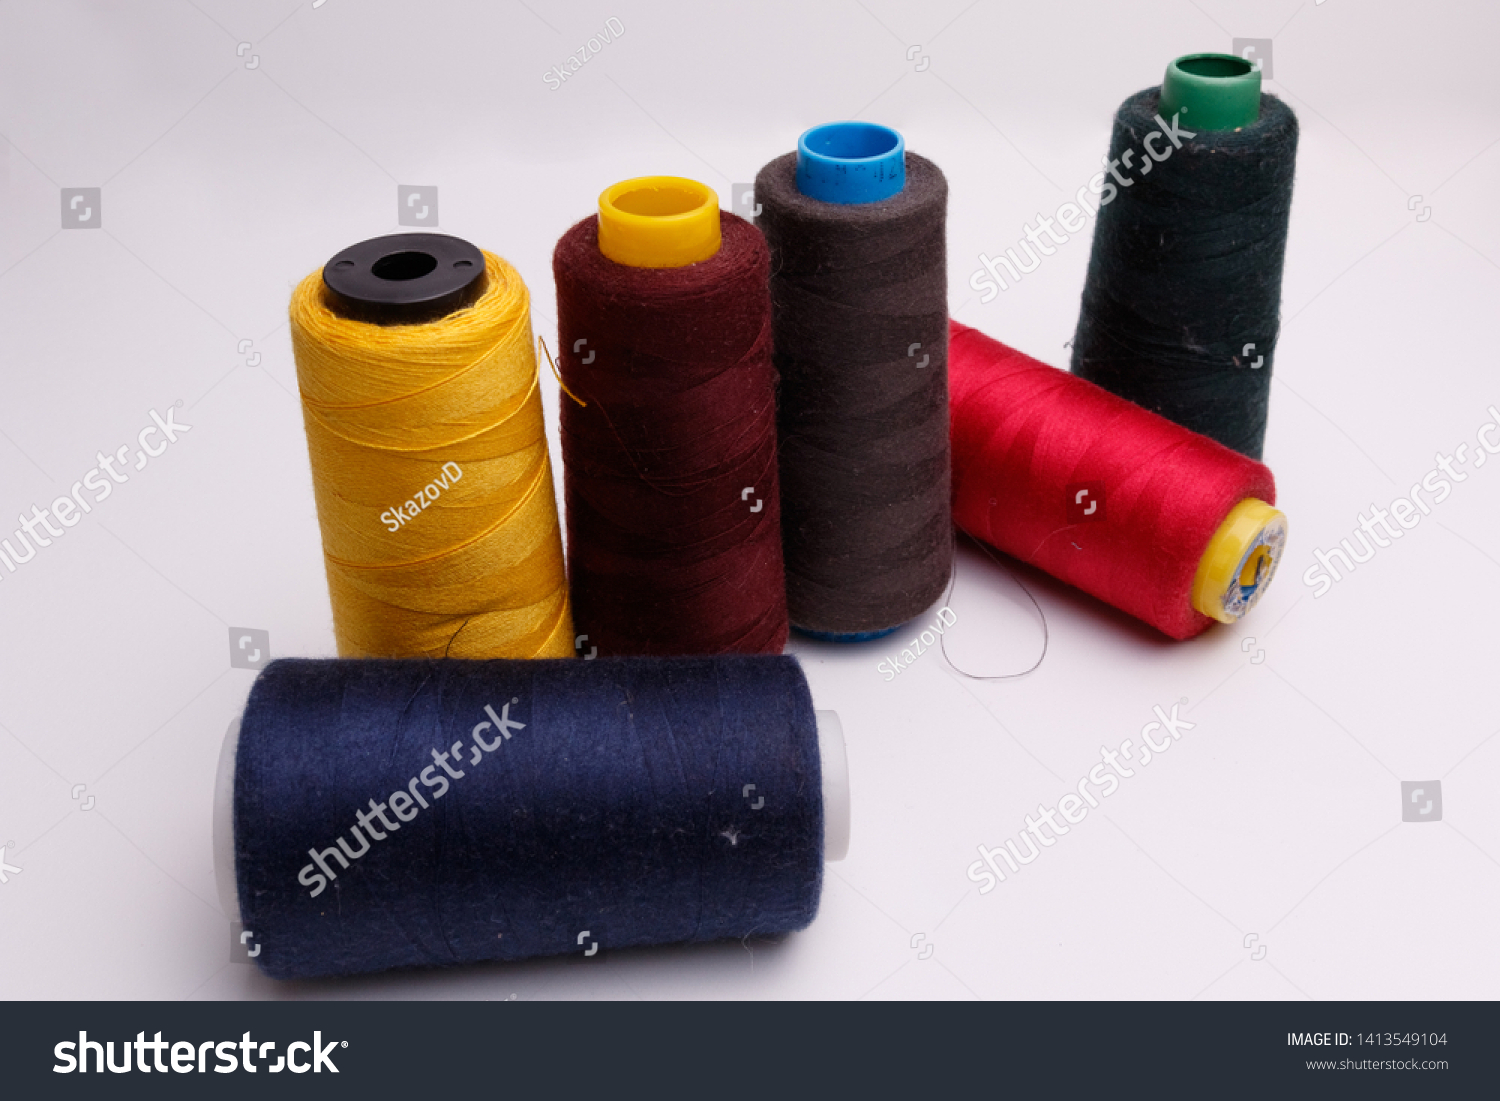 Colourful spools of thread on white background #1413549104